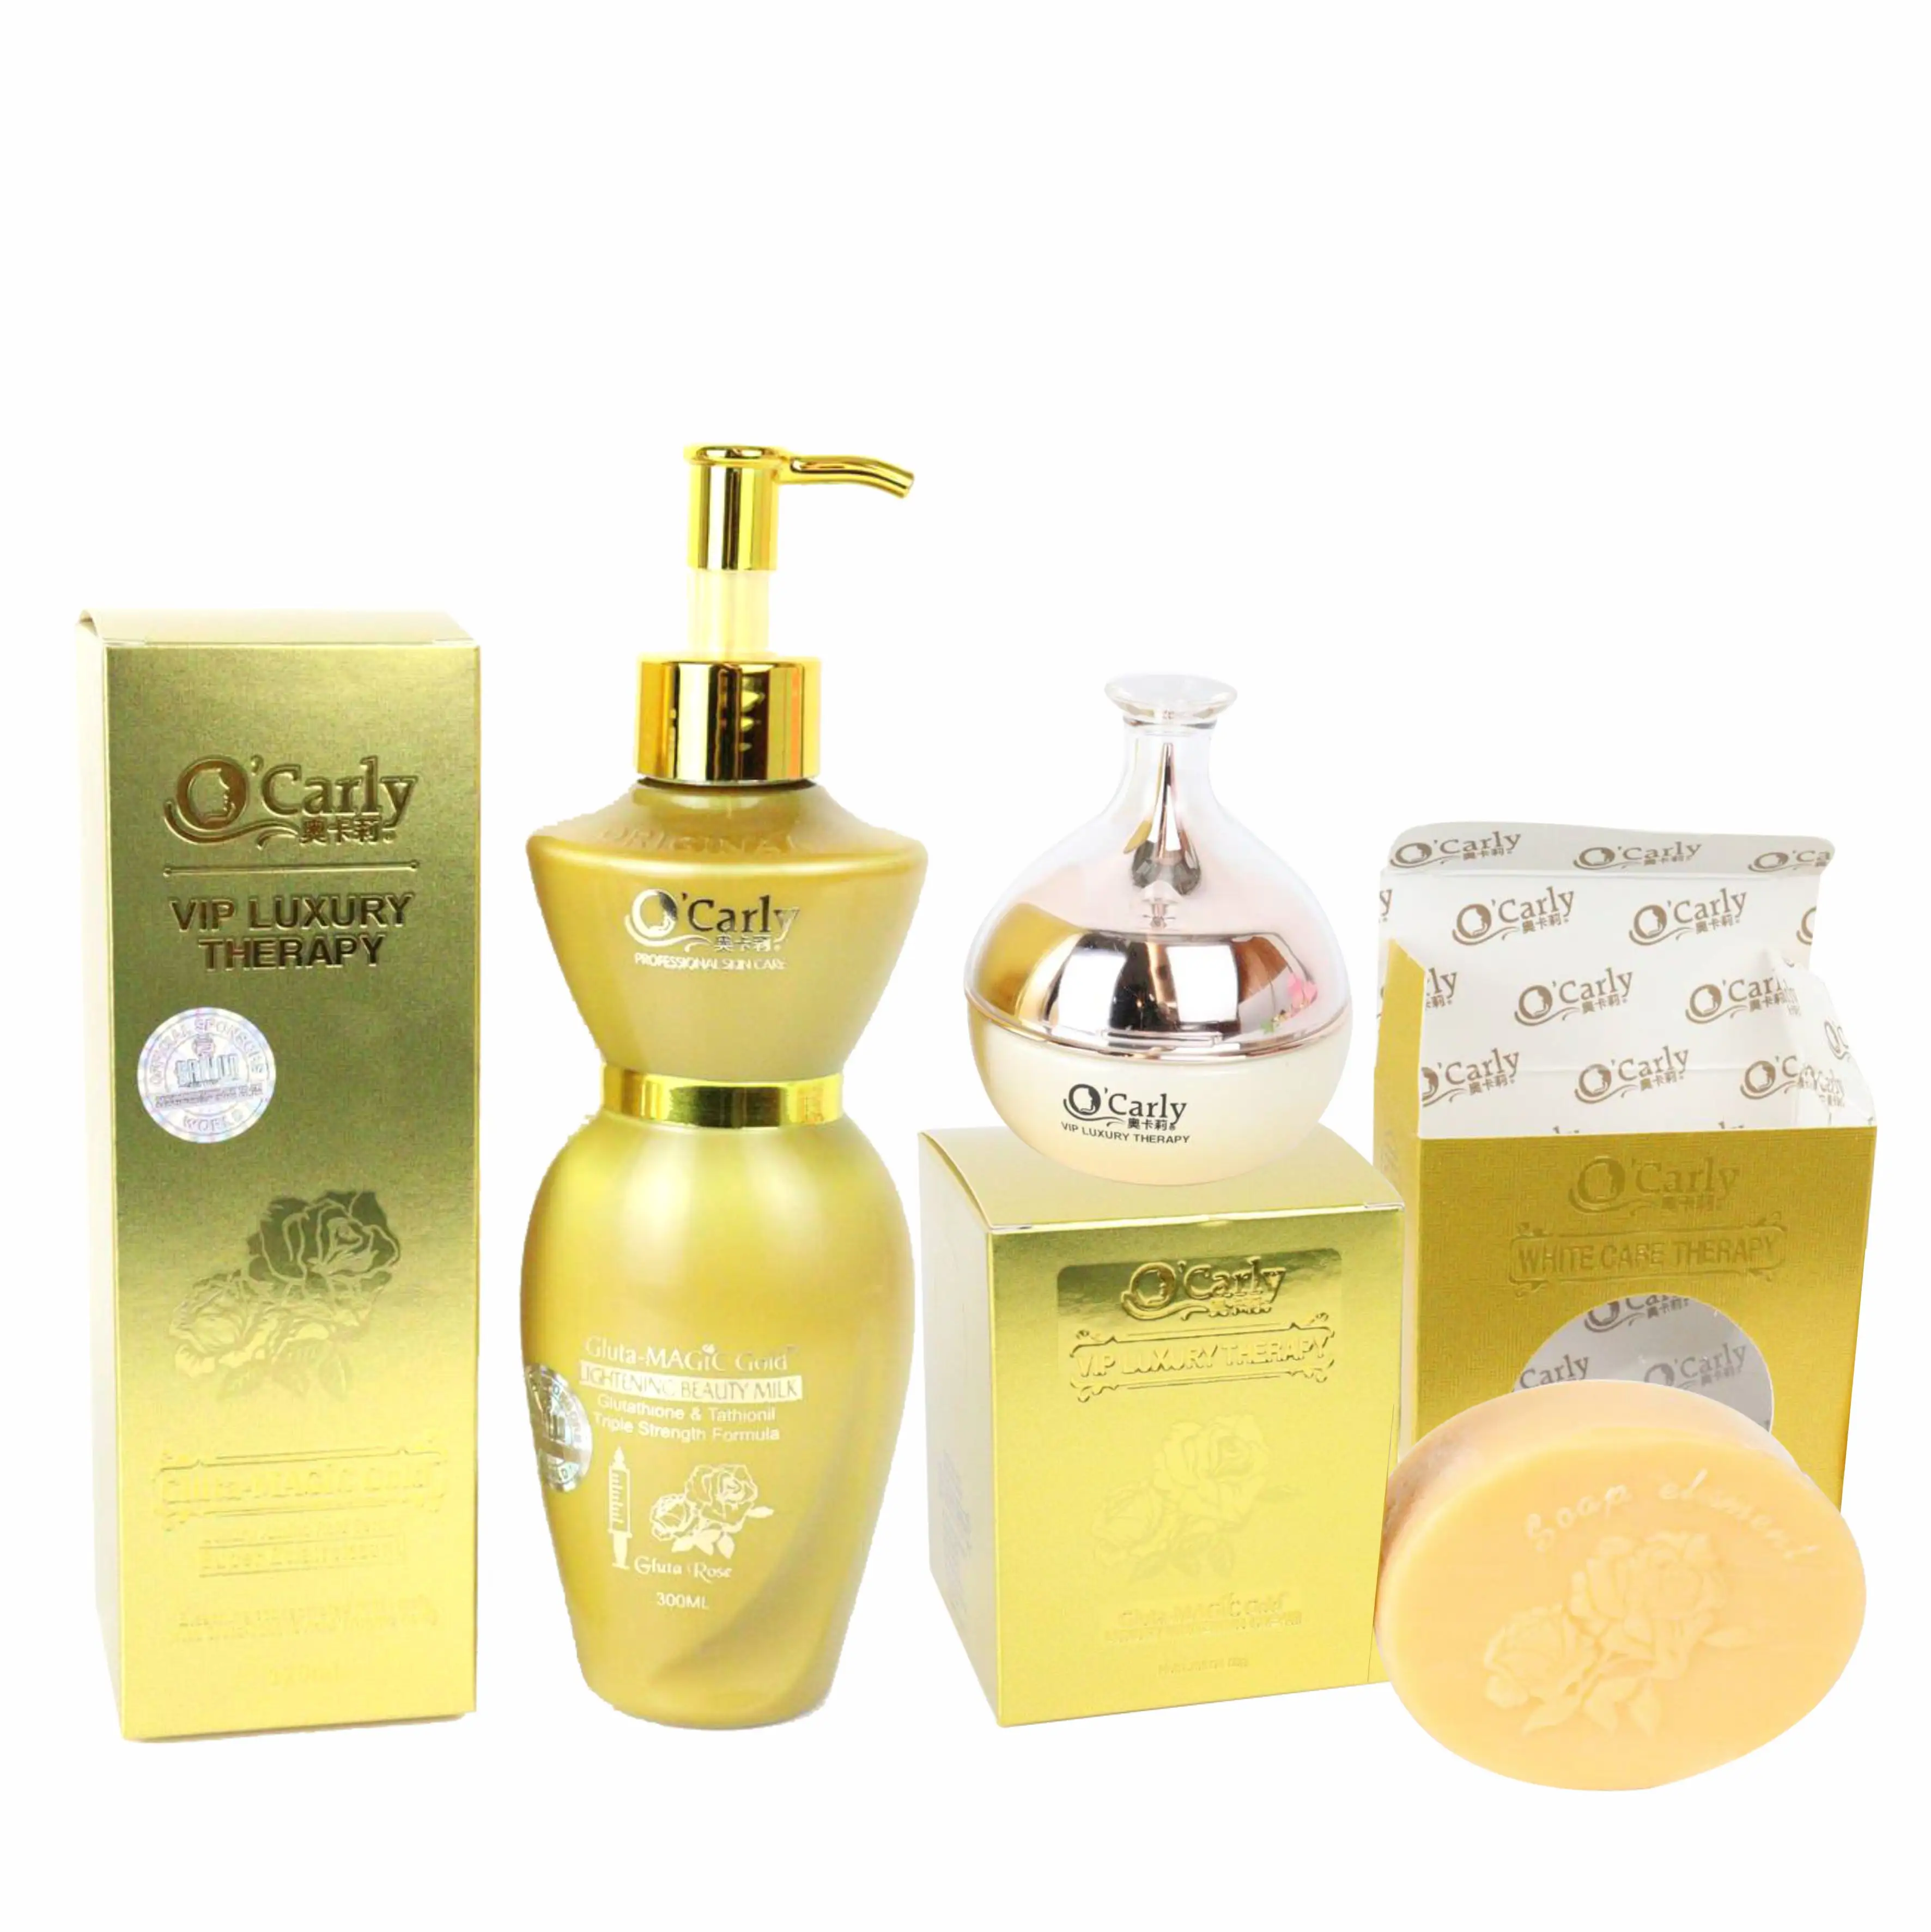 OEM Private Label Magic SkinCare Set Glow complexion with Body Lotion Serum Cream Soap whitening Luxury Custom Beauty Products